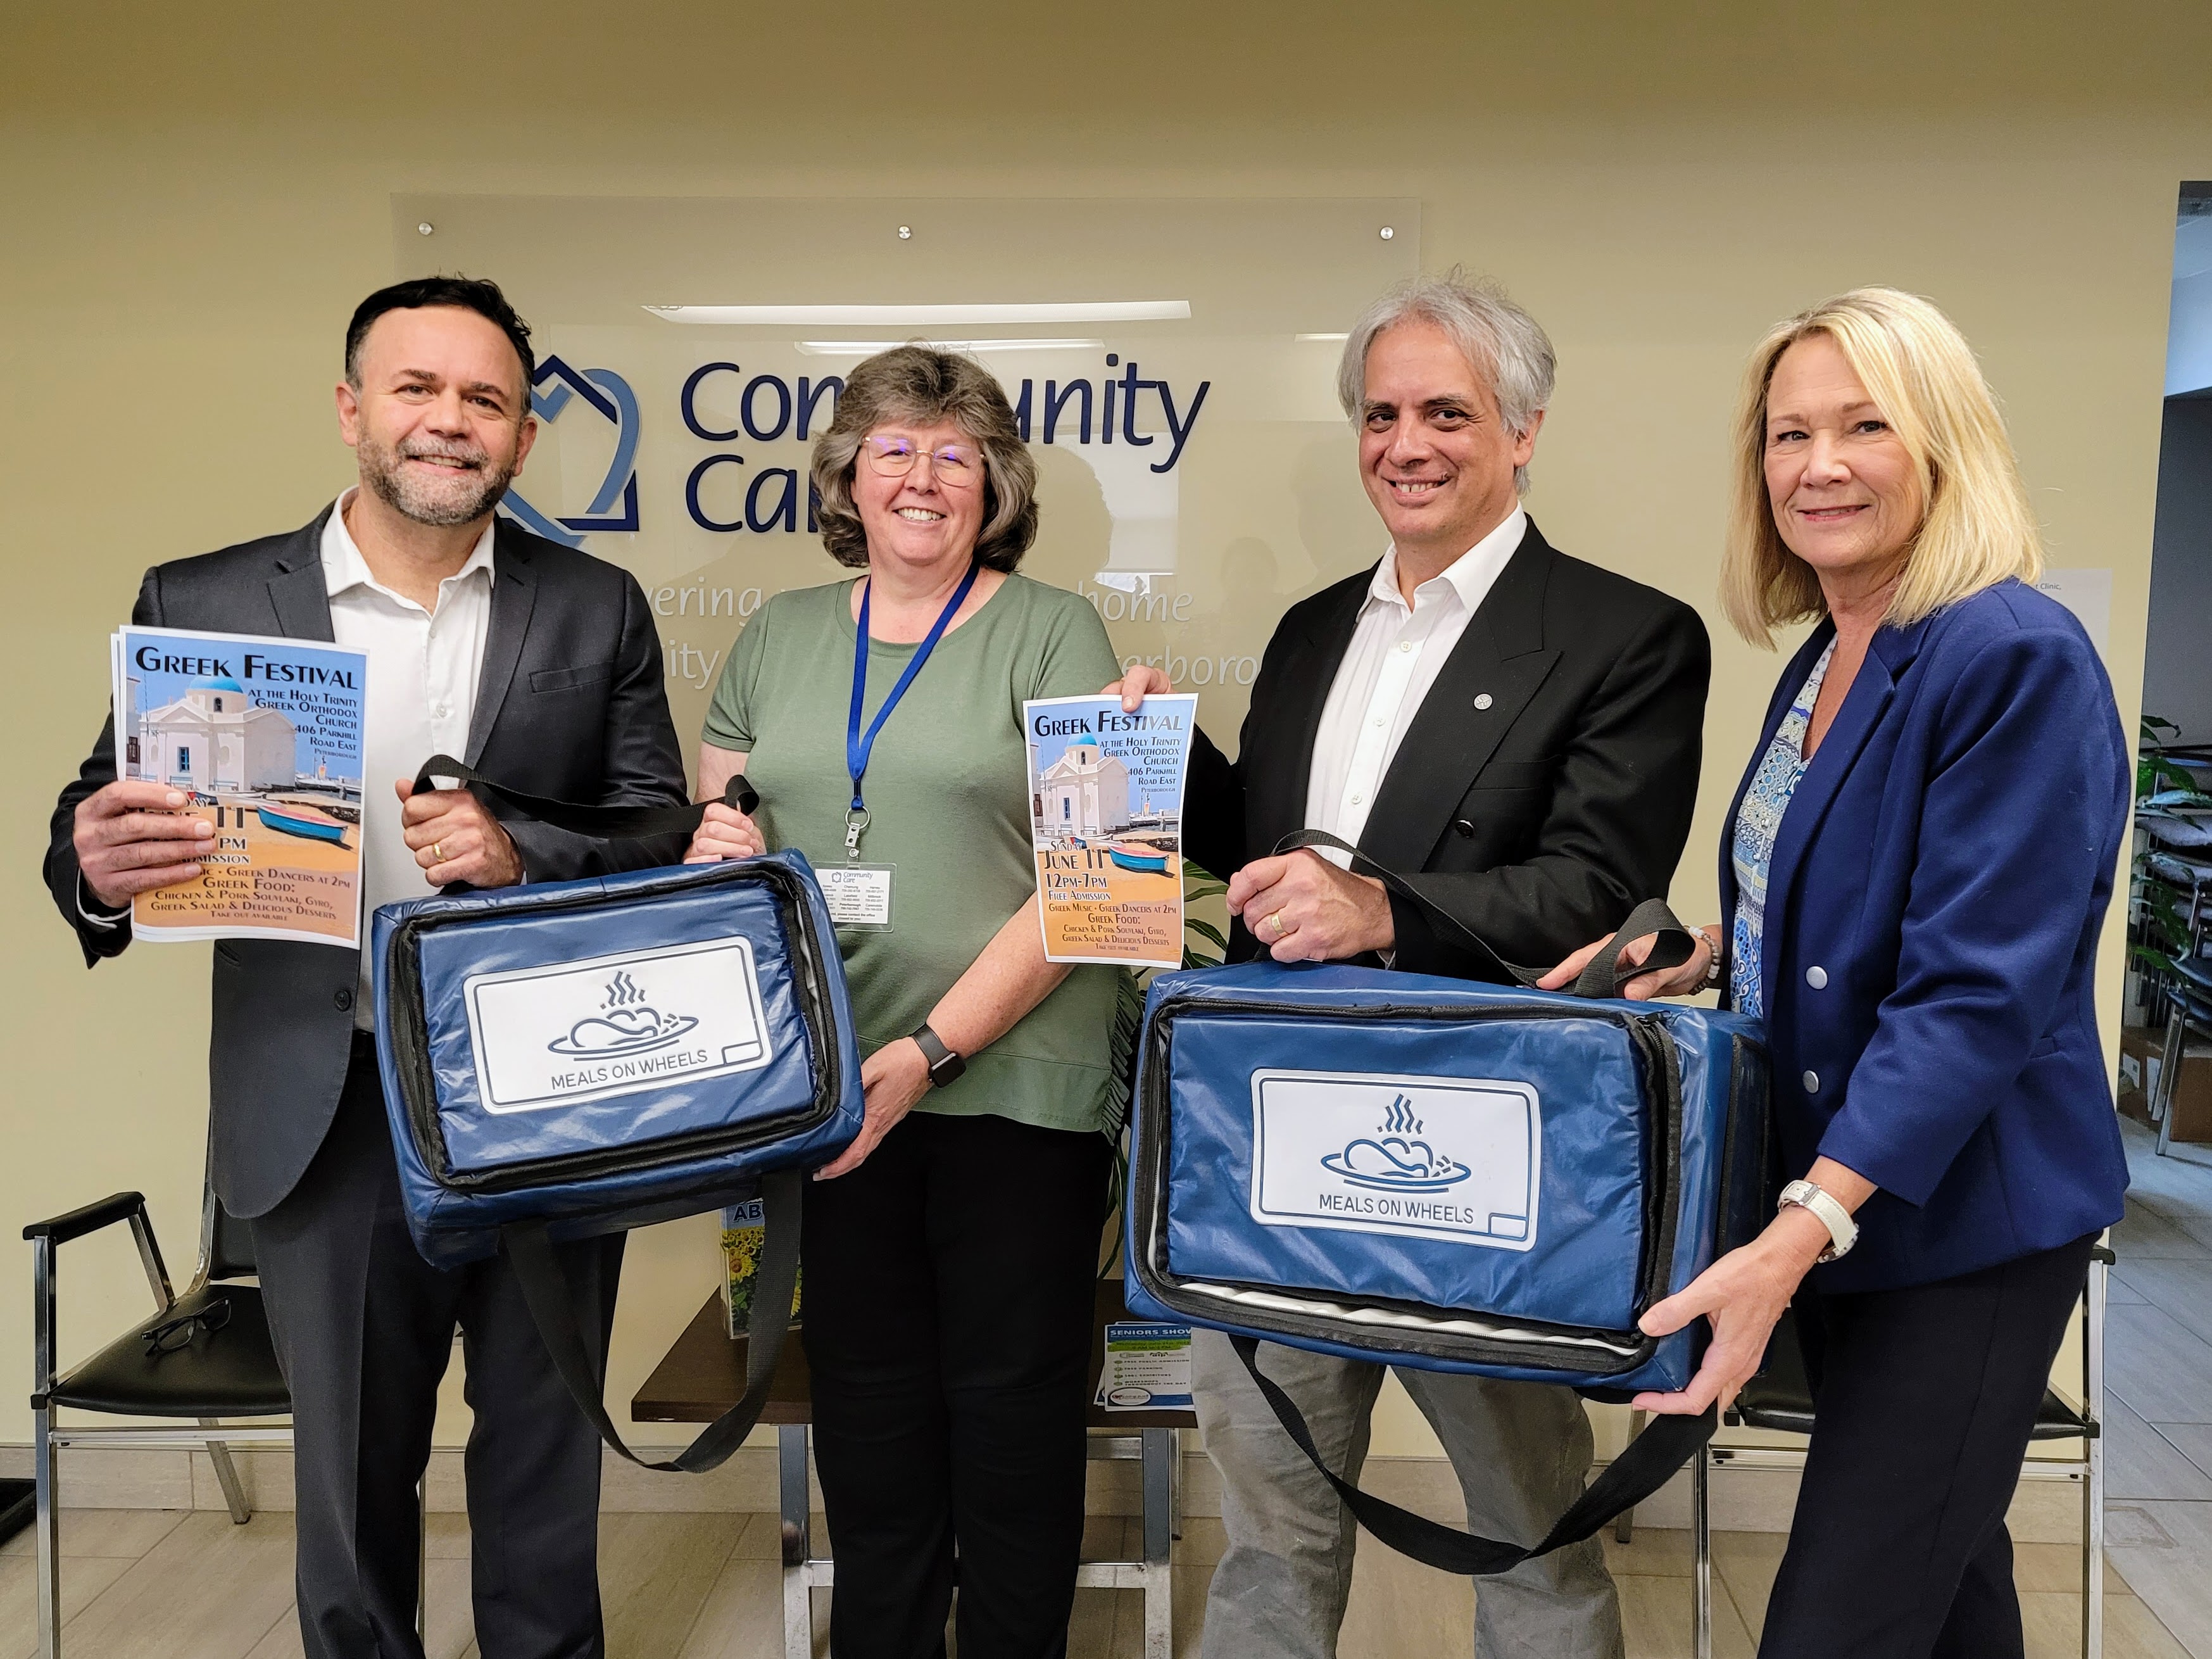 Picture taken at Community Care Peterborough office, left to right: Councillor Don Vassiliadis, Iris Crowder – Client Service Coordinator and Meals to Go fundraiser coordinator for CCP, Dean Pappas and Catherine Pink – Director, Support Services at CCP. holding poster of Greek Festival and Meals on Wheels delivery bags